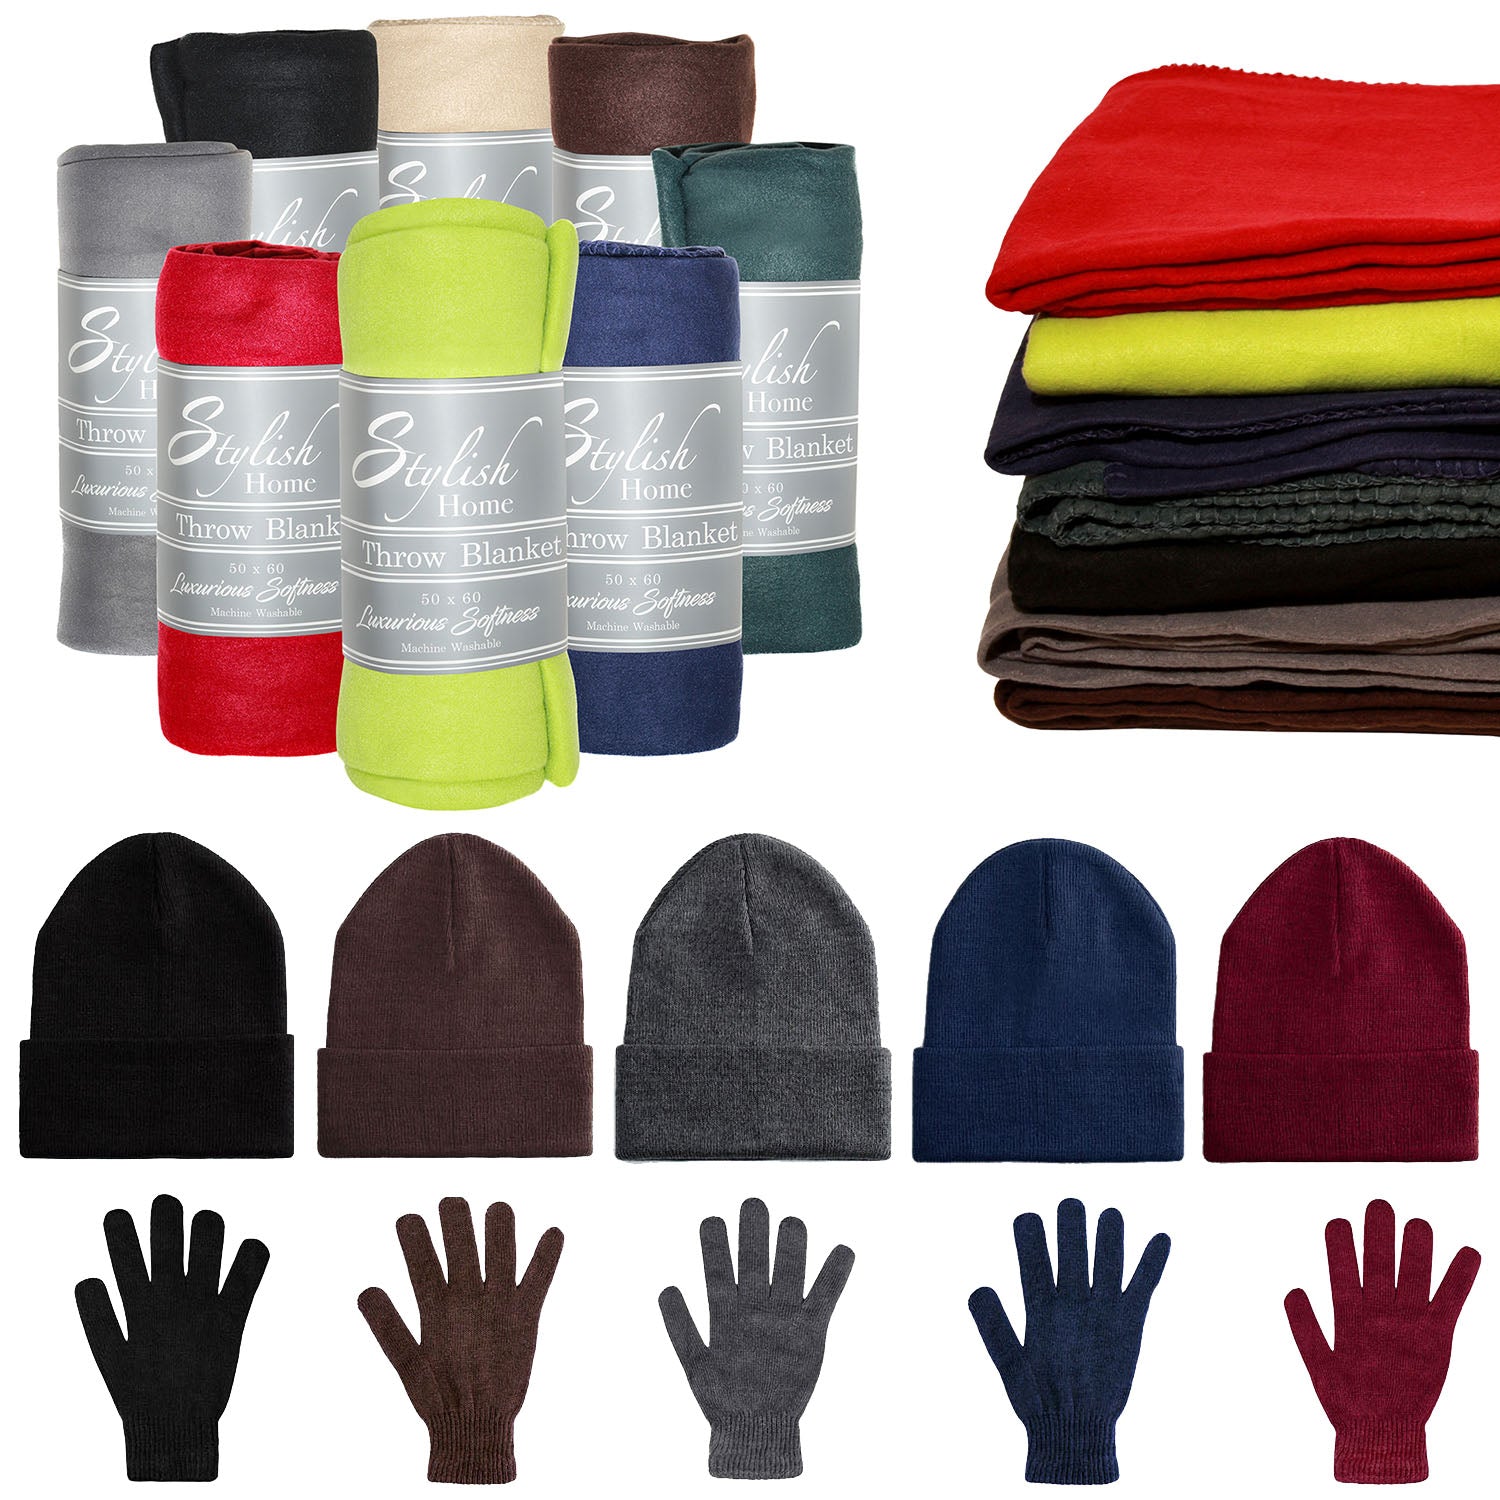 Homeless Care Package Supplies - Bulk Case of 12 Winter Throw Blankets, 12 Winter Sets